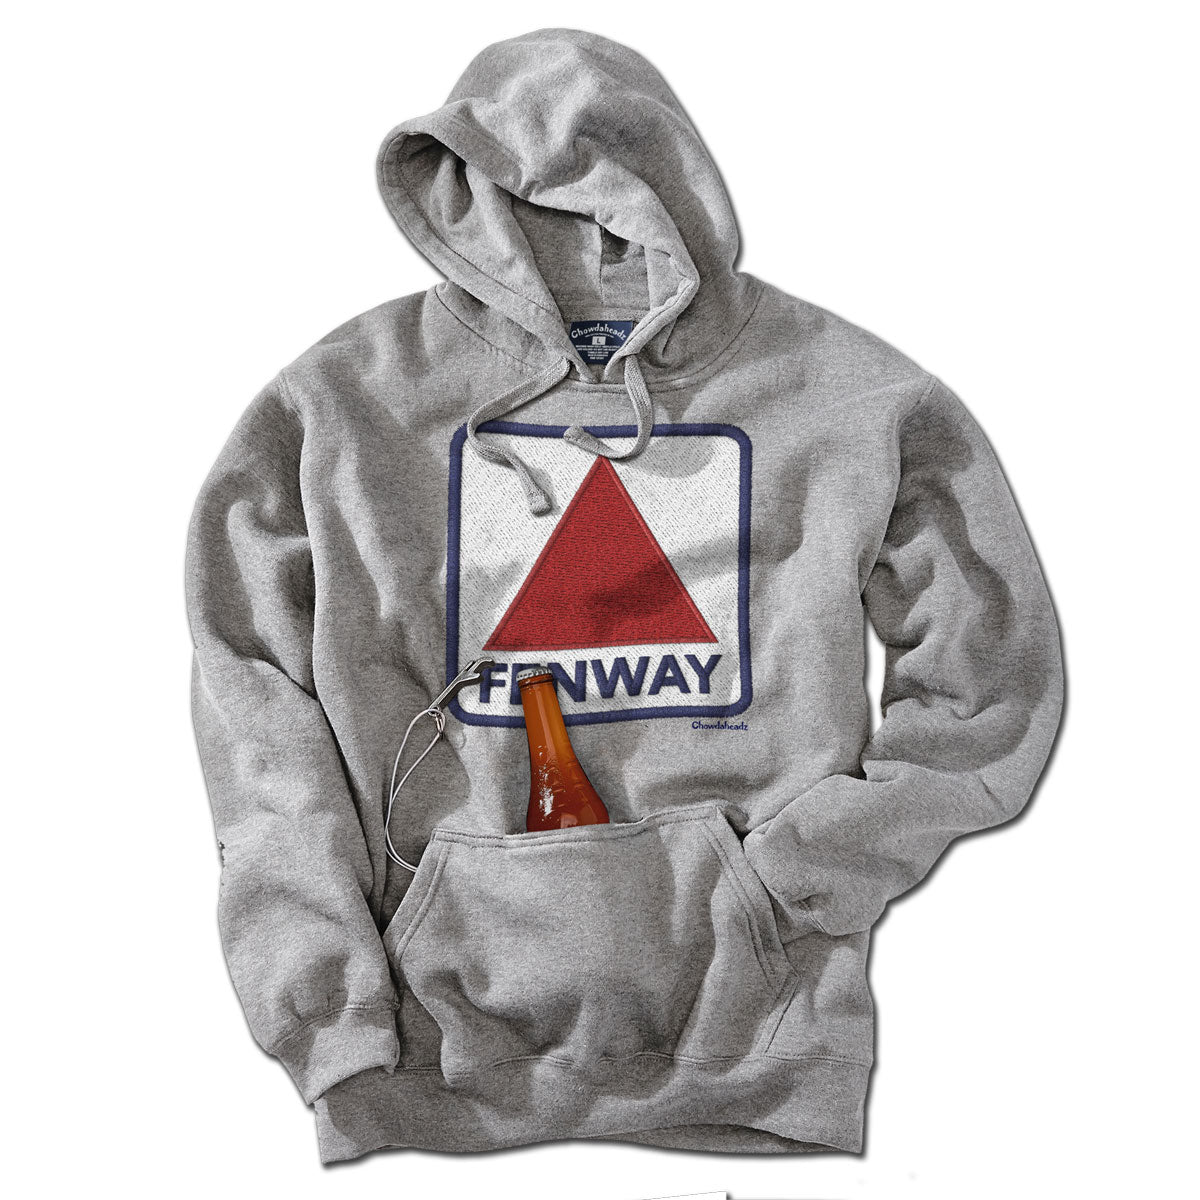 Fenway Sign Faux Embroidery Tailgater Hoodie - Chowdaheadz